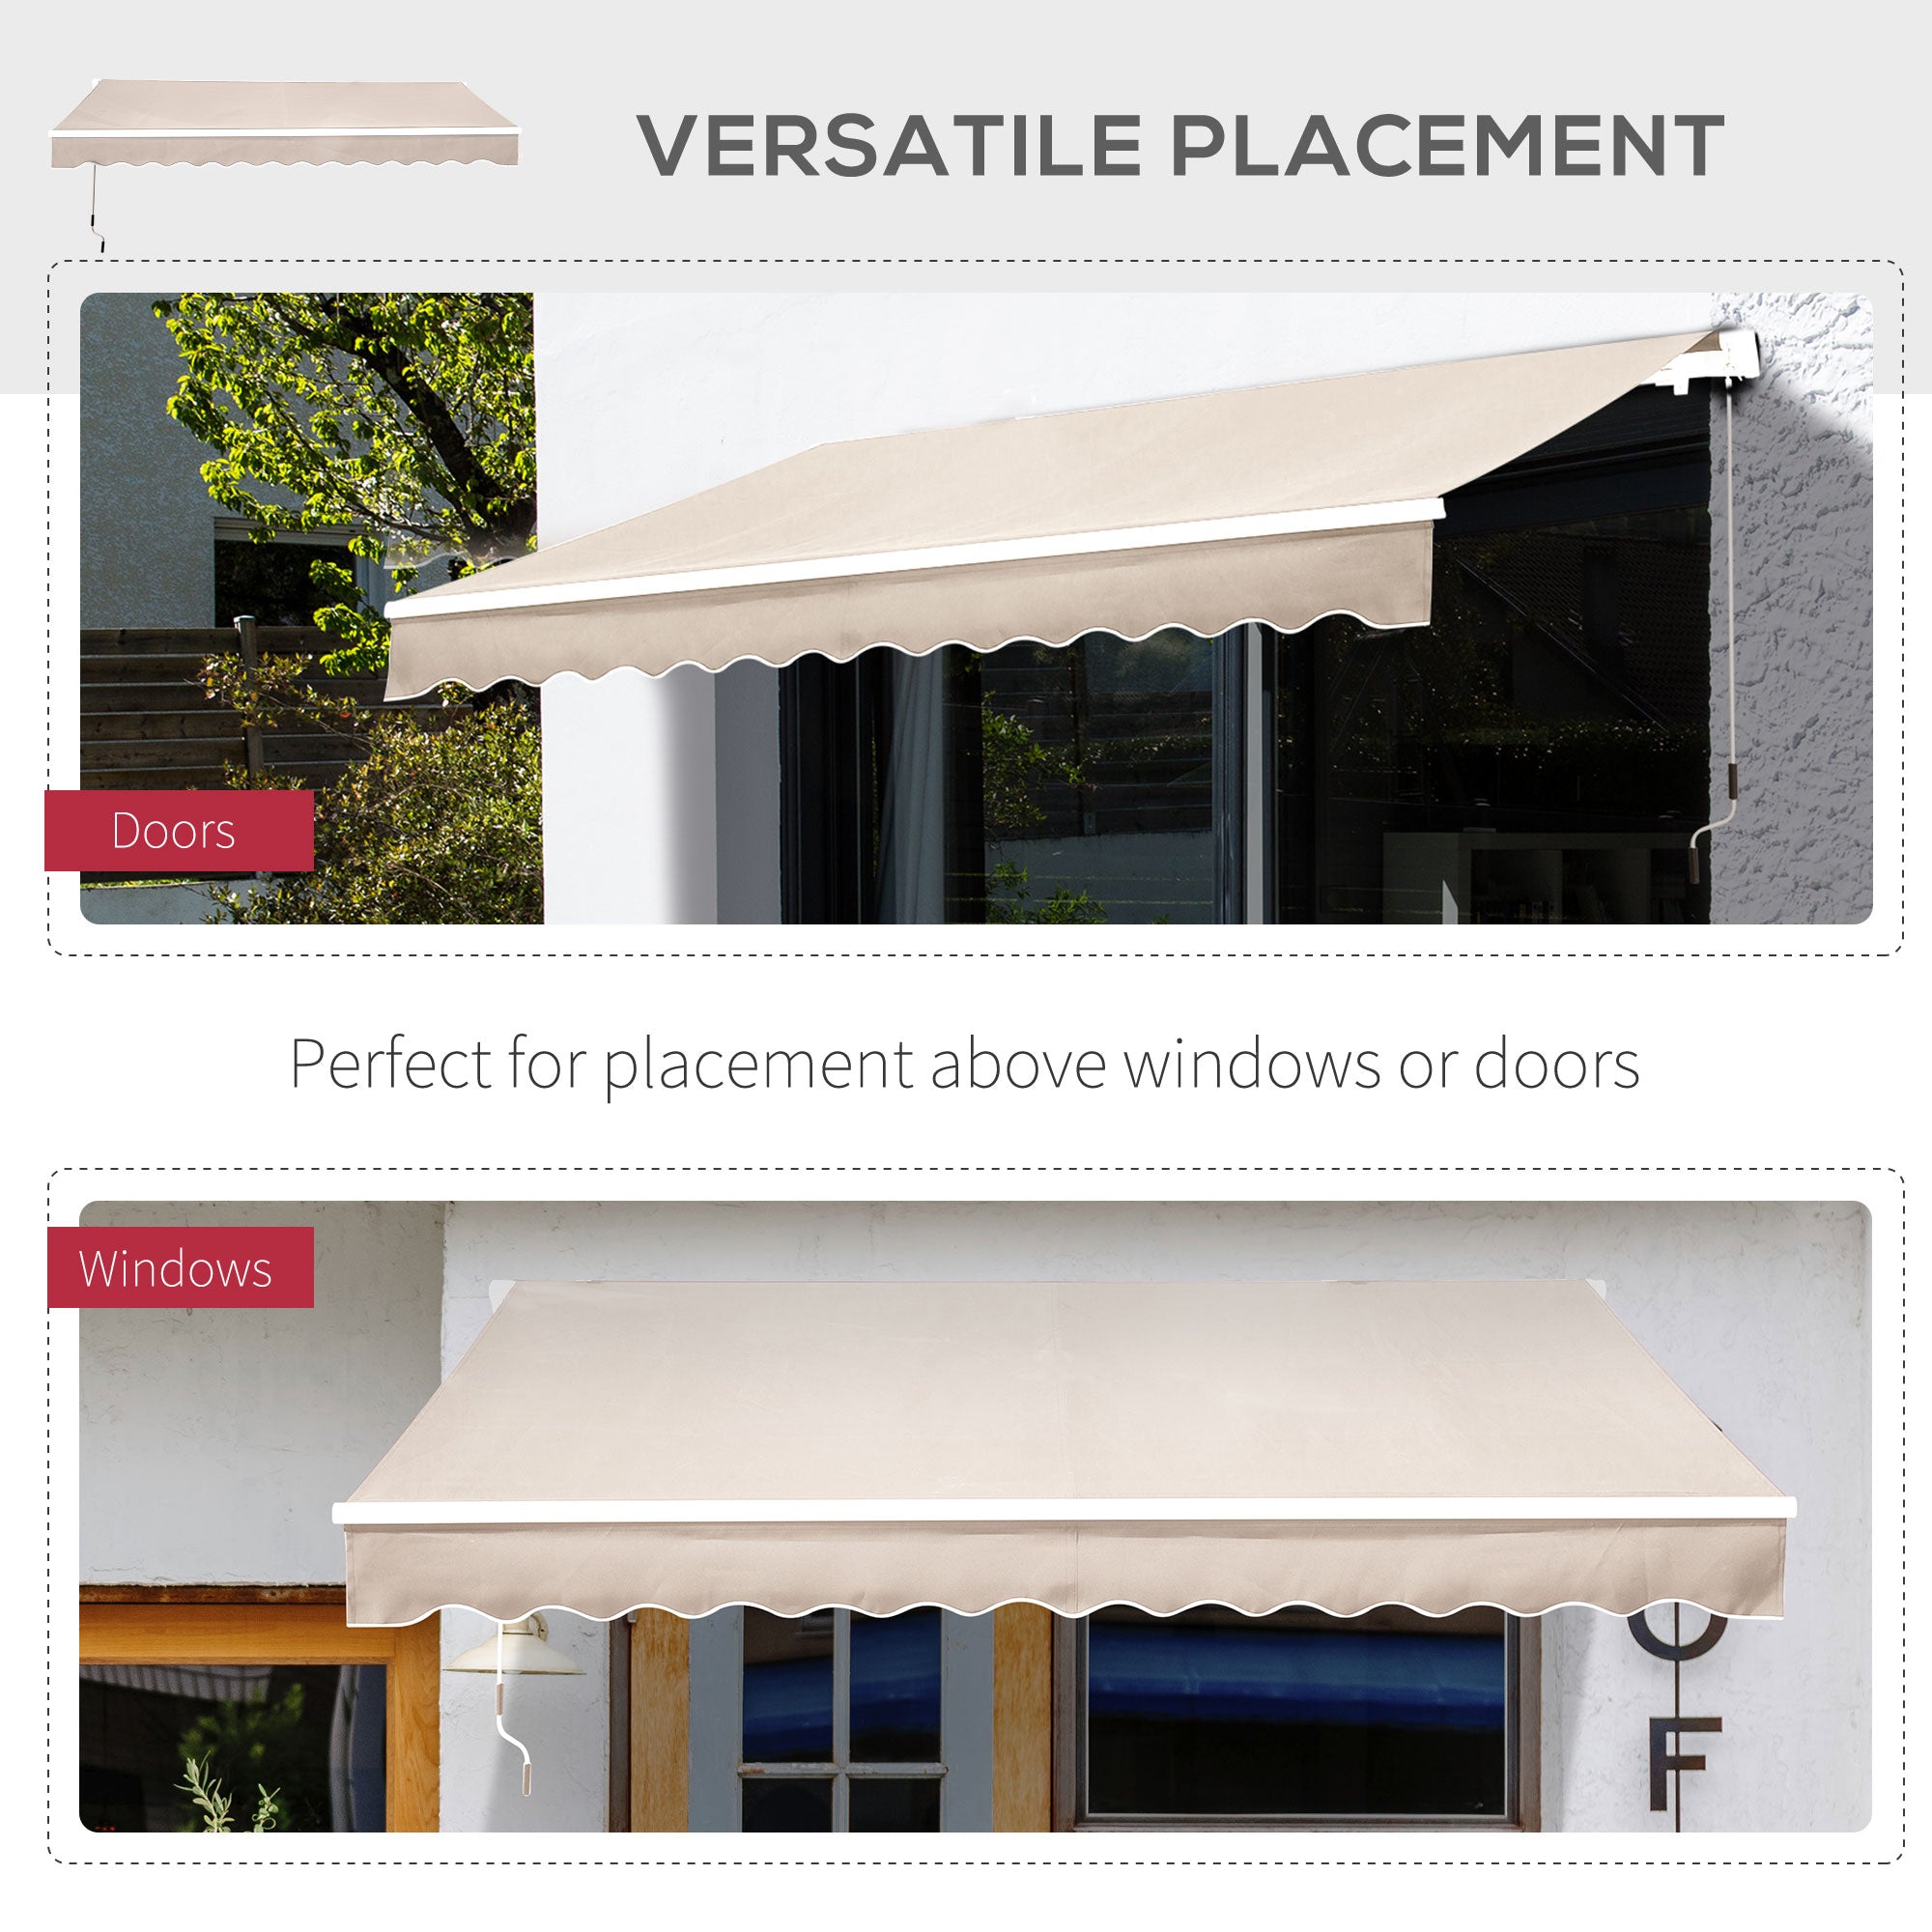 Outsunny 3 x 2.5m Garden Patio Manual Awning Canopy Sun Shade Shelter with Winding Handle Retractable - Cream White - Inspirely